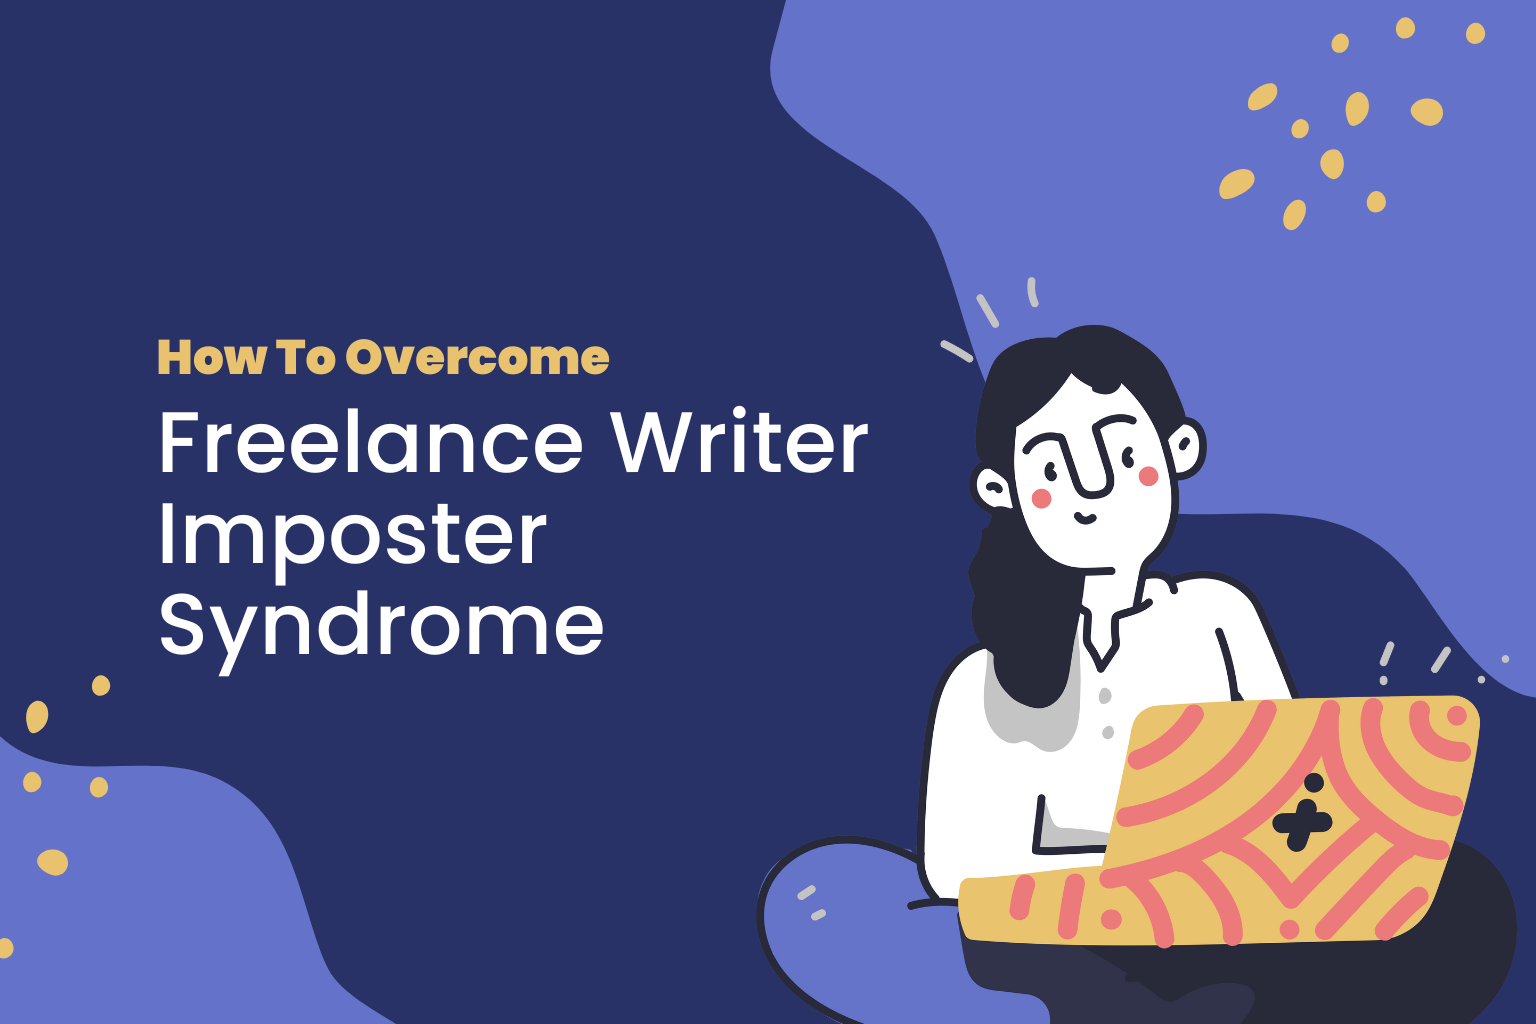 How To Overcome Freelance Writer Imposter Syndrome.